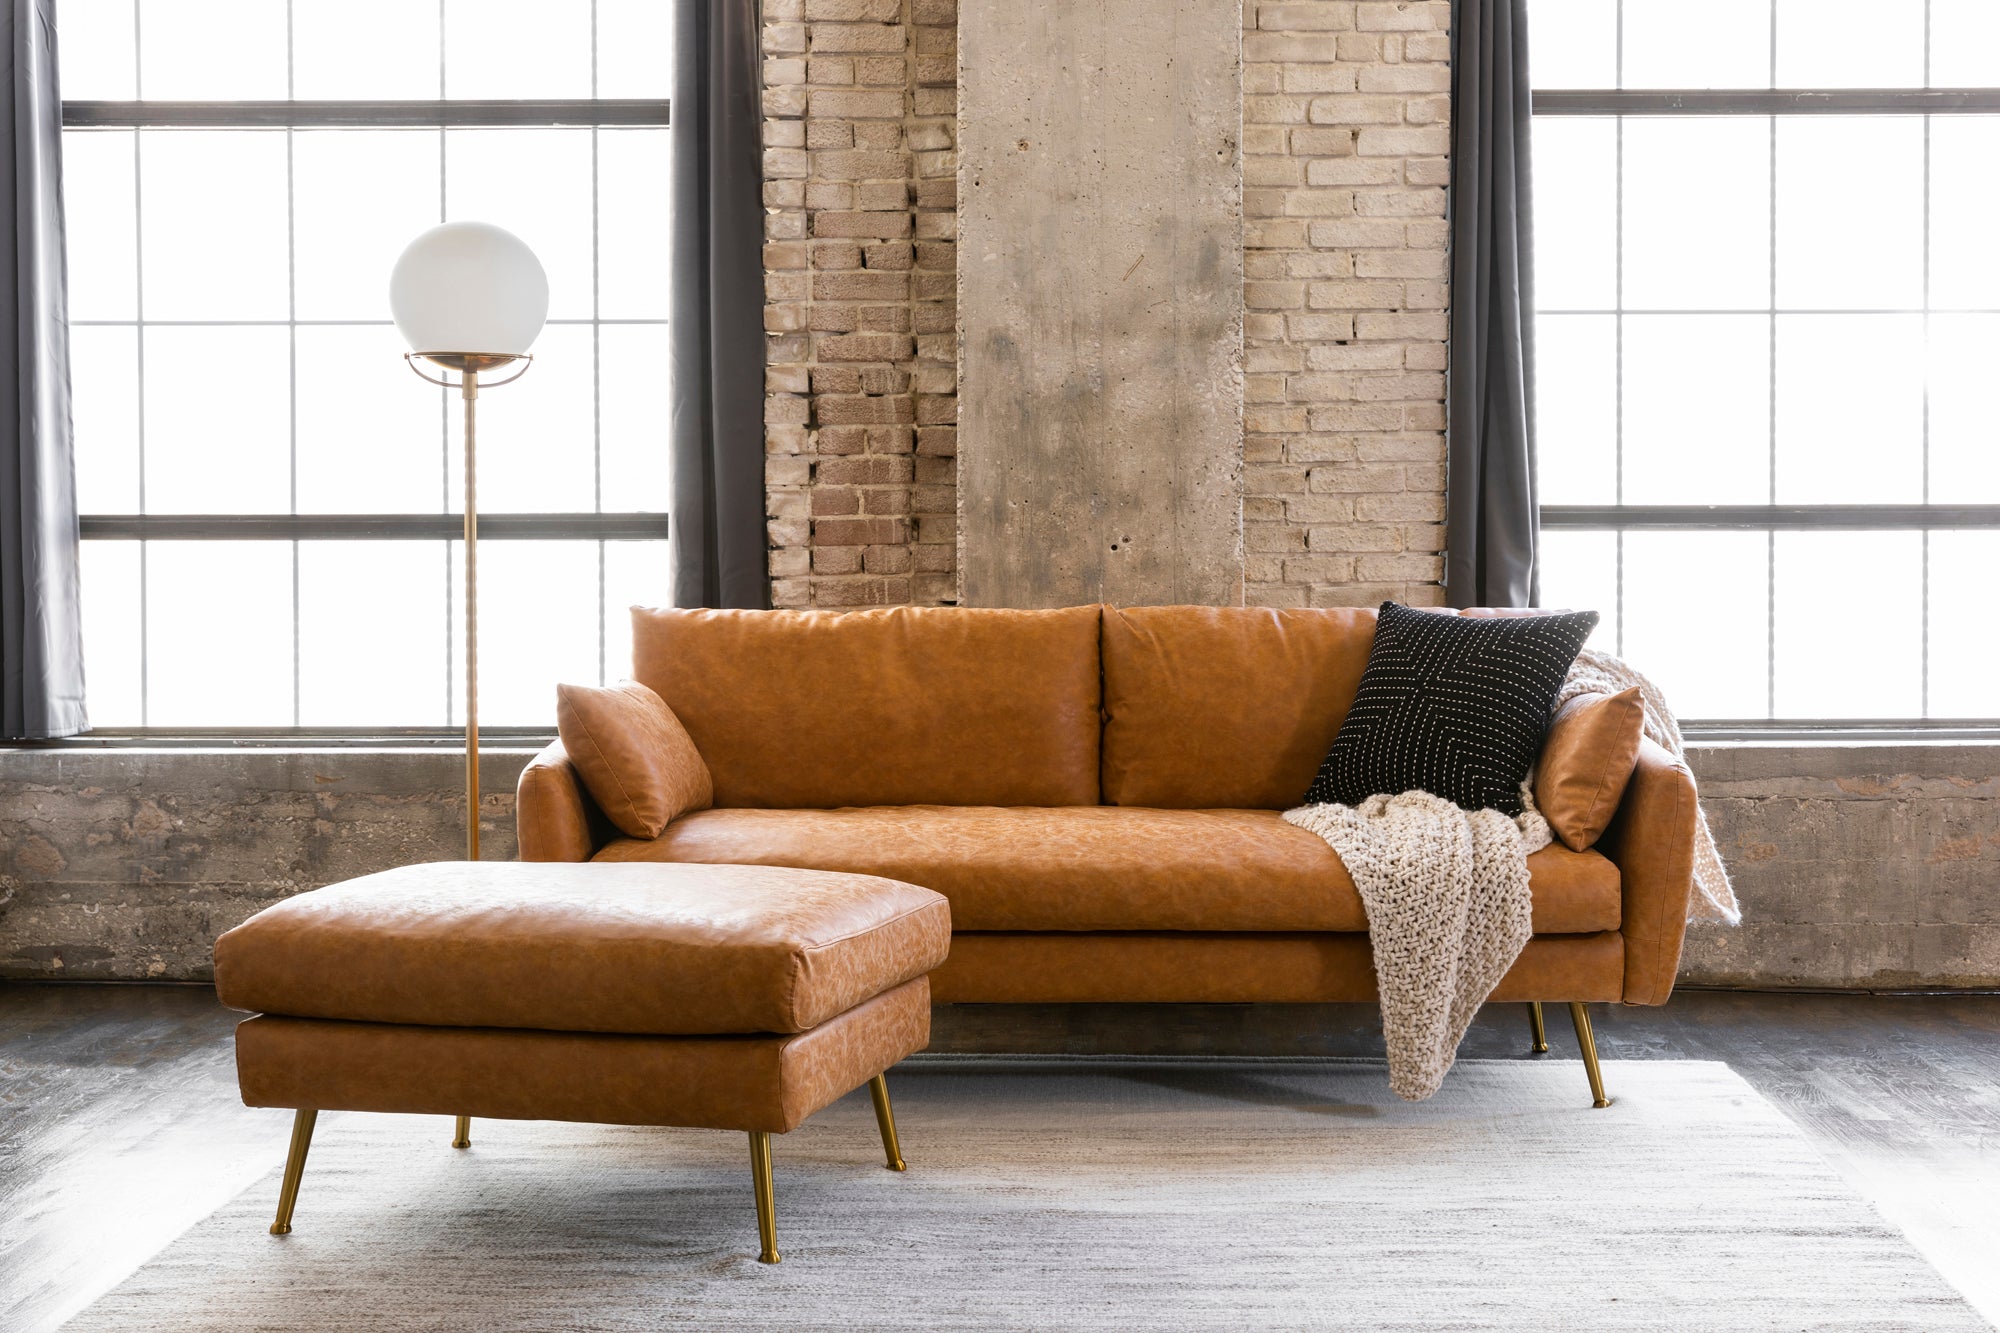 park sofa shown in distressed vegan leather with gold legs